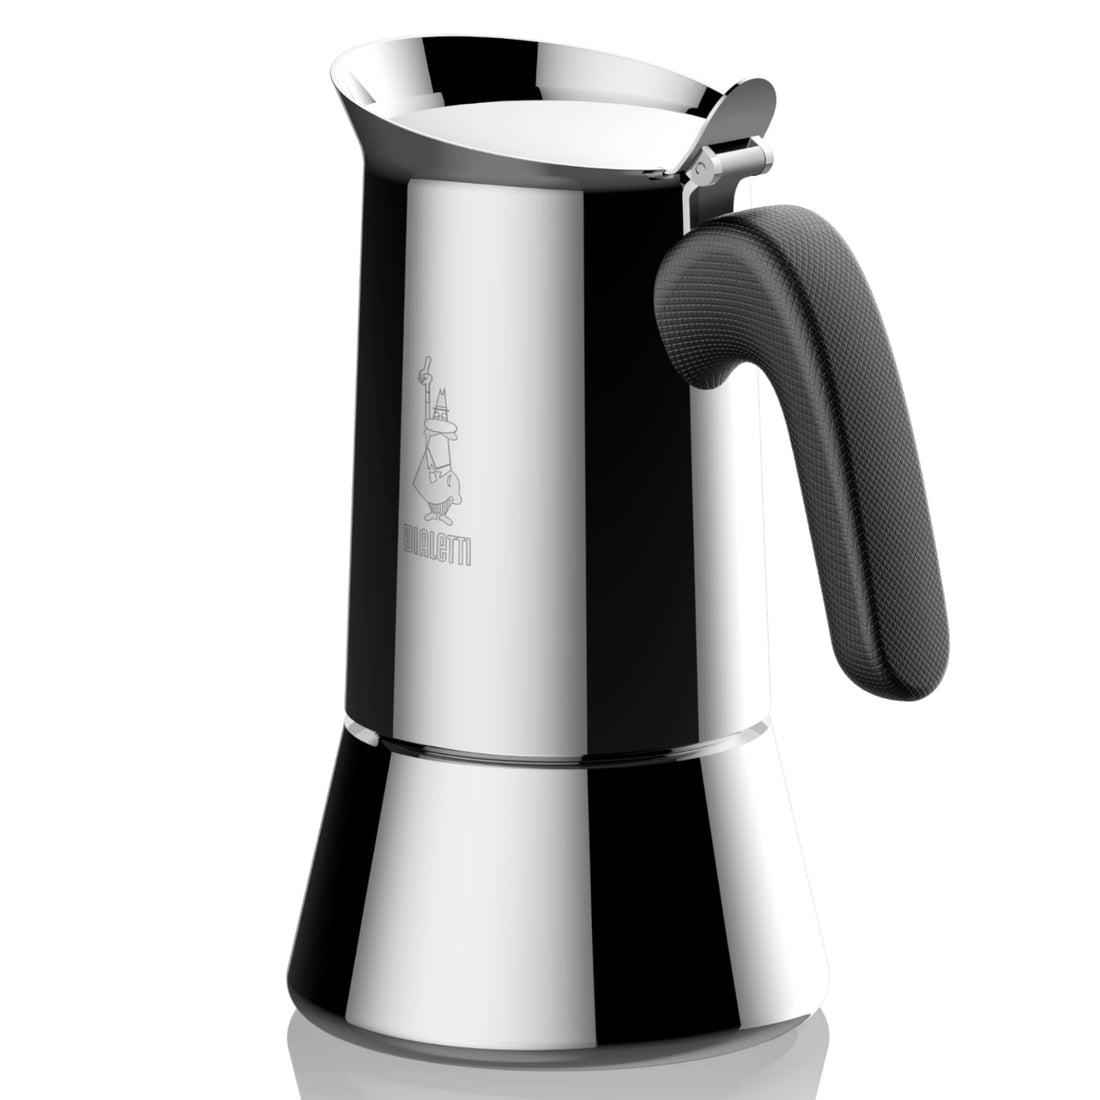 Stainless Steel Electric Coffee Percolator (6-Cup)